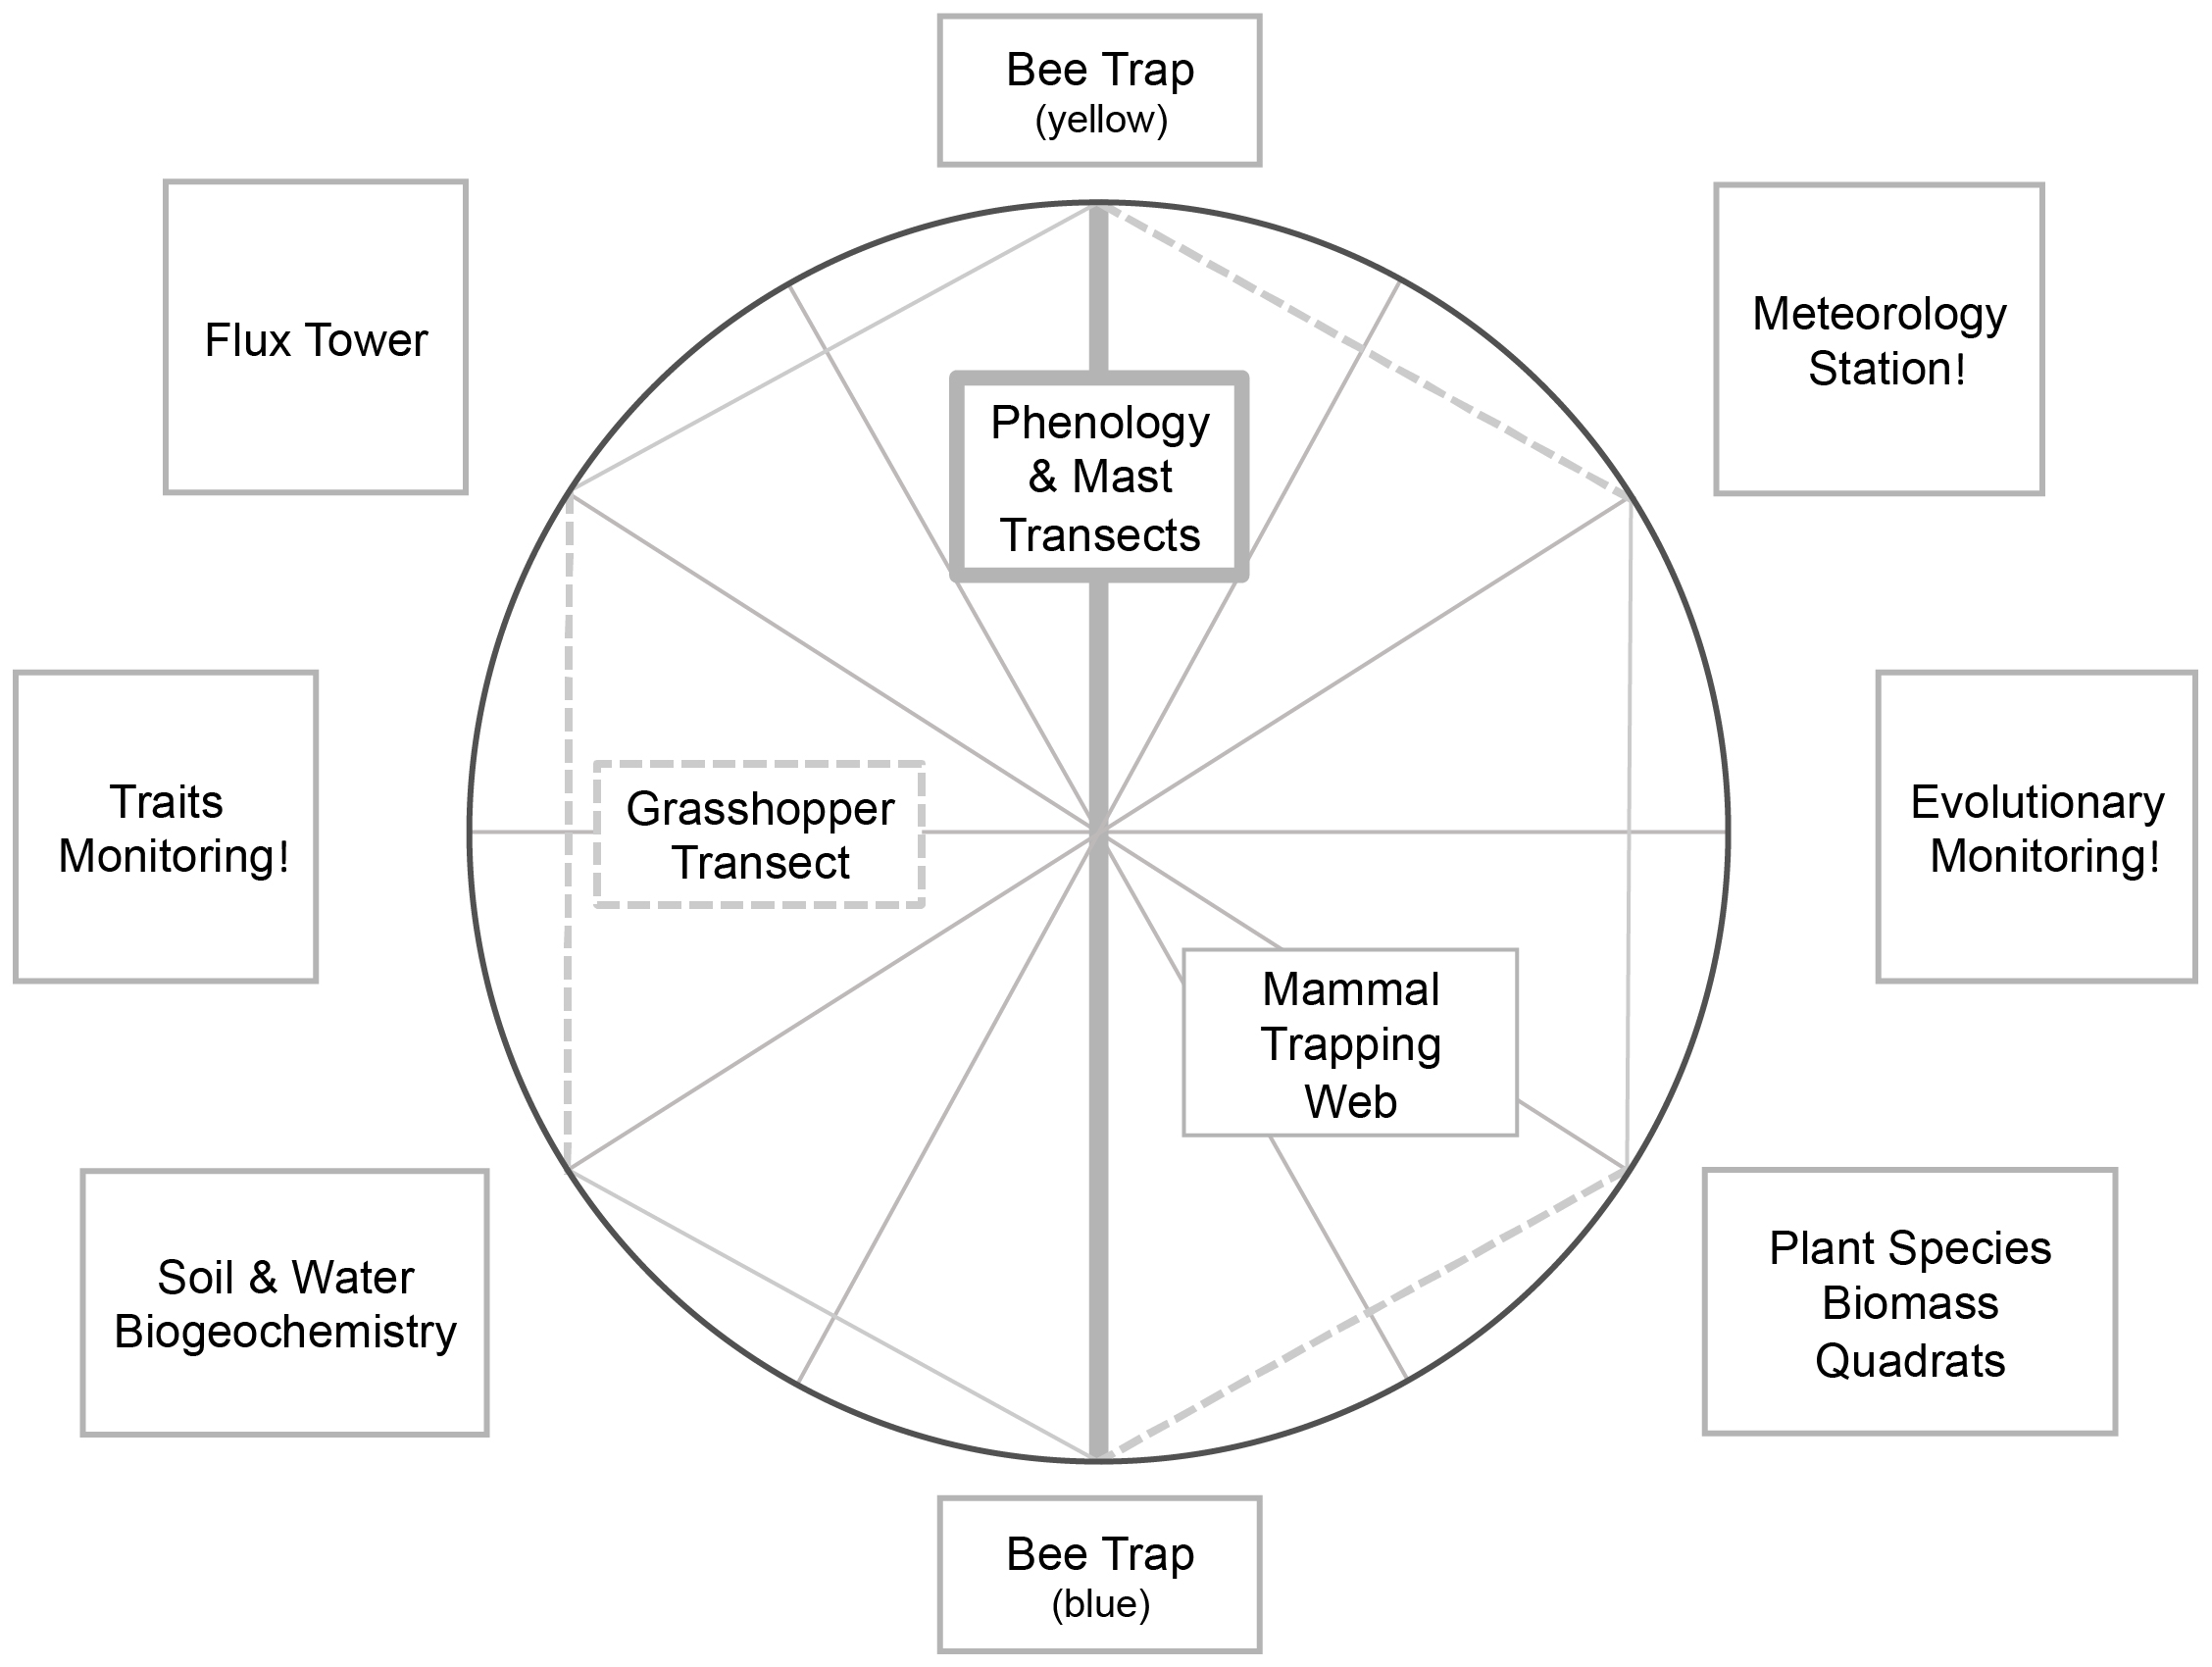 Twelve transects radiate from a central point like spokes on a wheel, constituting the mammal trapping web. Along one spoke is the grasshopper transect and on another are phenology and mast transects. The remaining monitoring projects are stationed around the outside of the wheel.